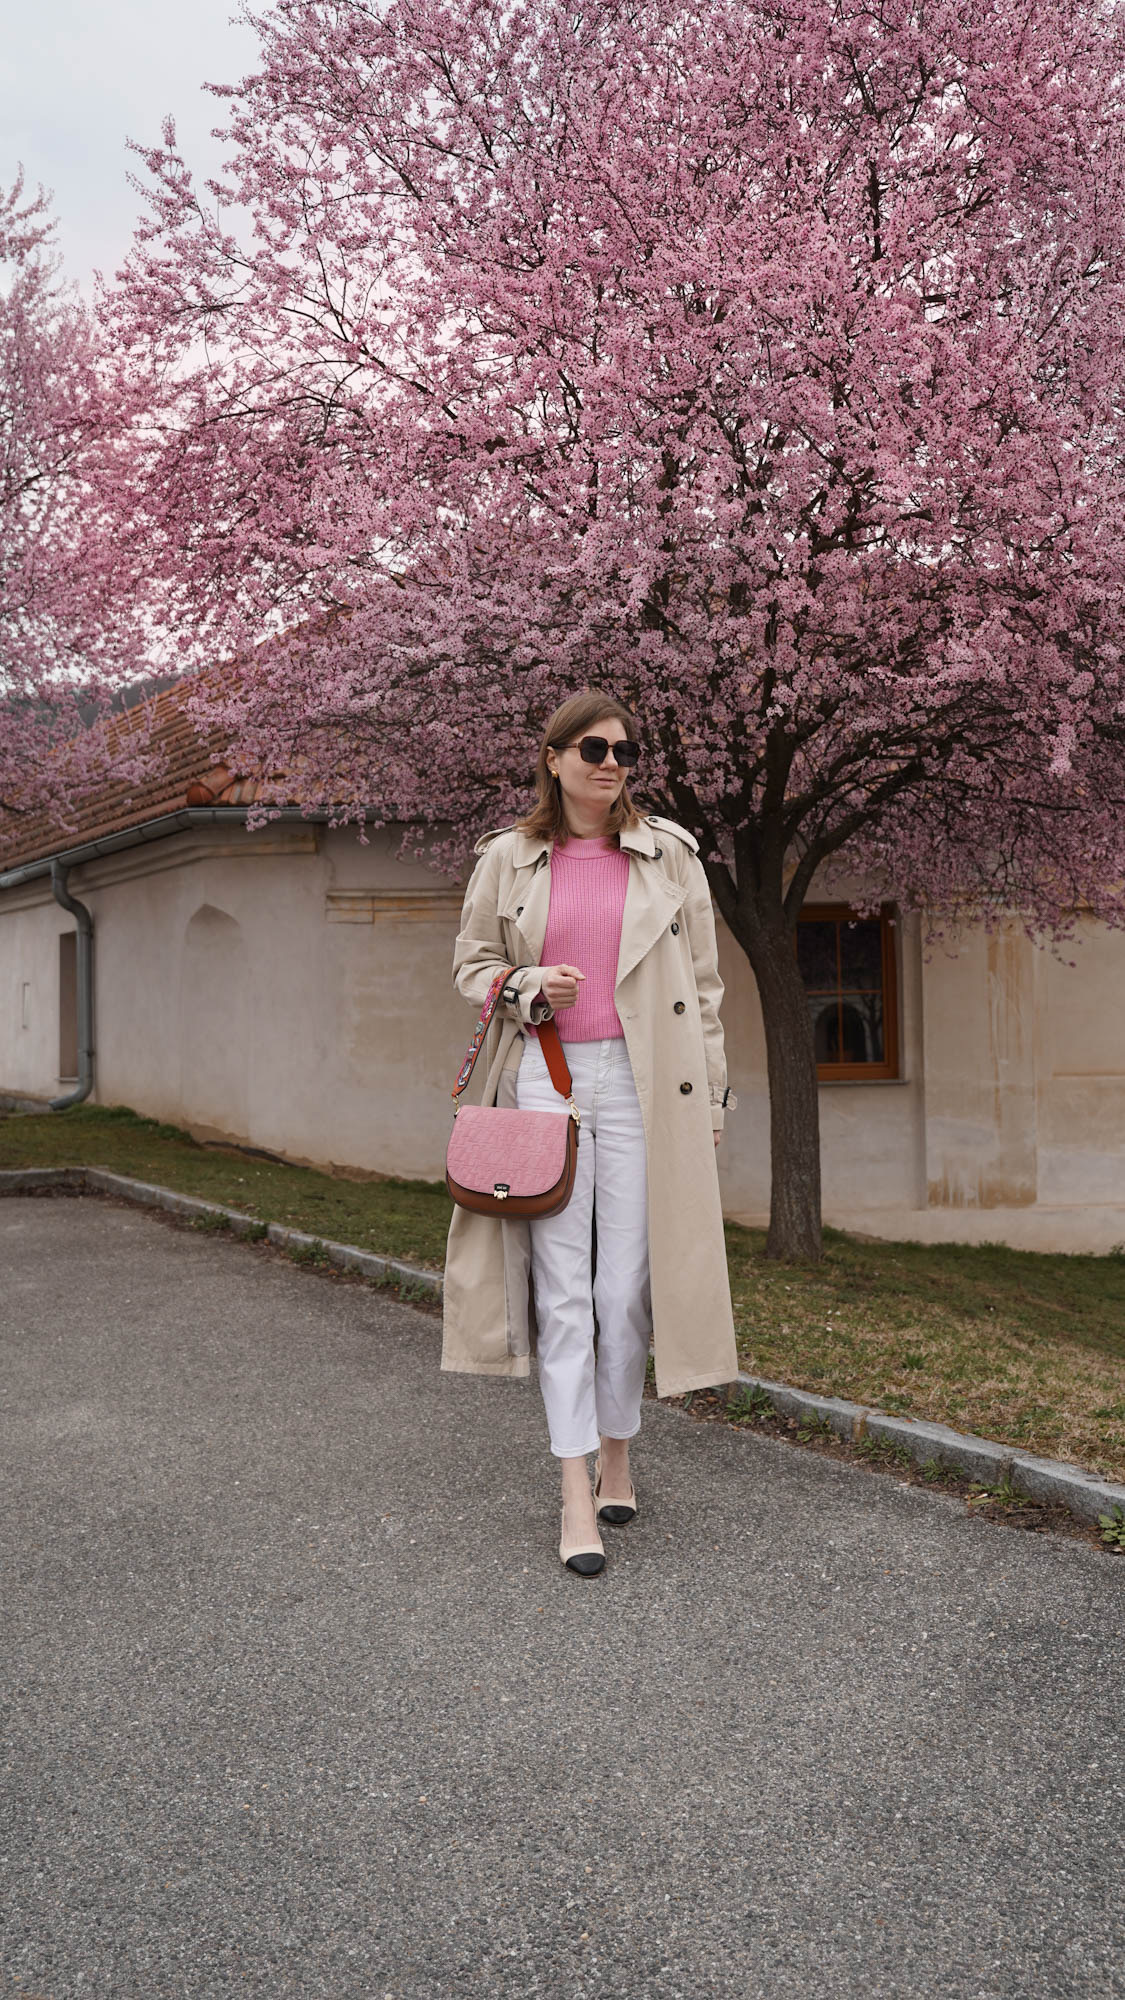 Trenchcoat pink Sweater white jeans skinny jeans pink bag casual spring